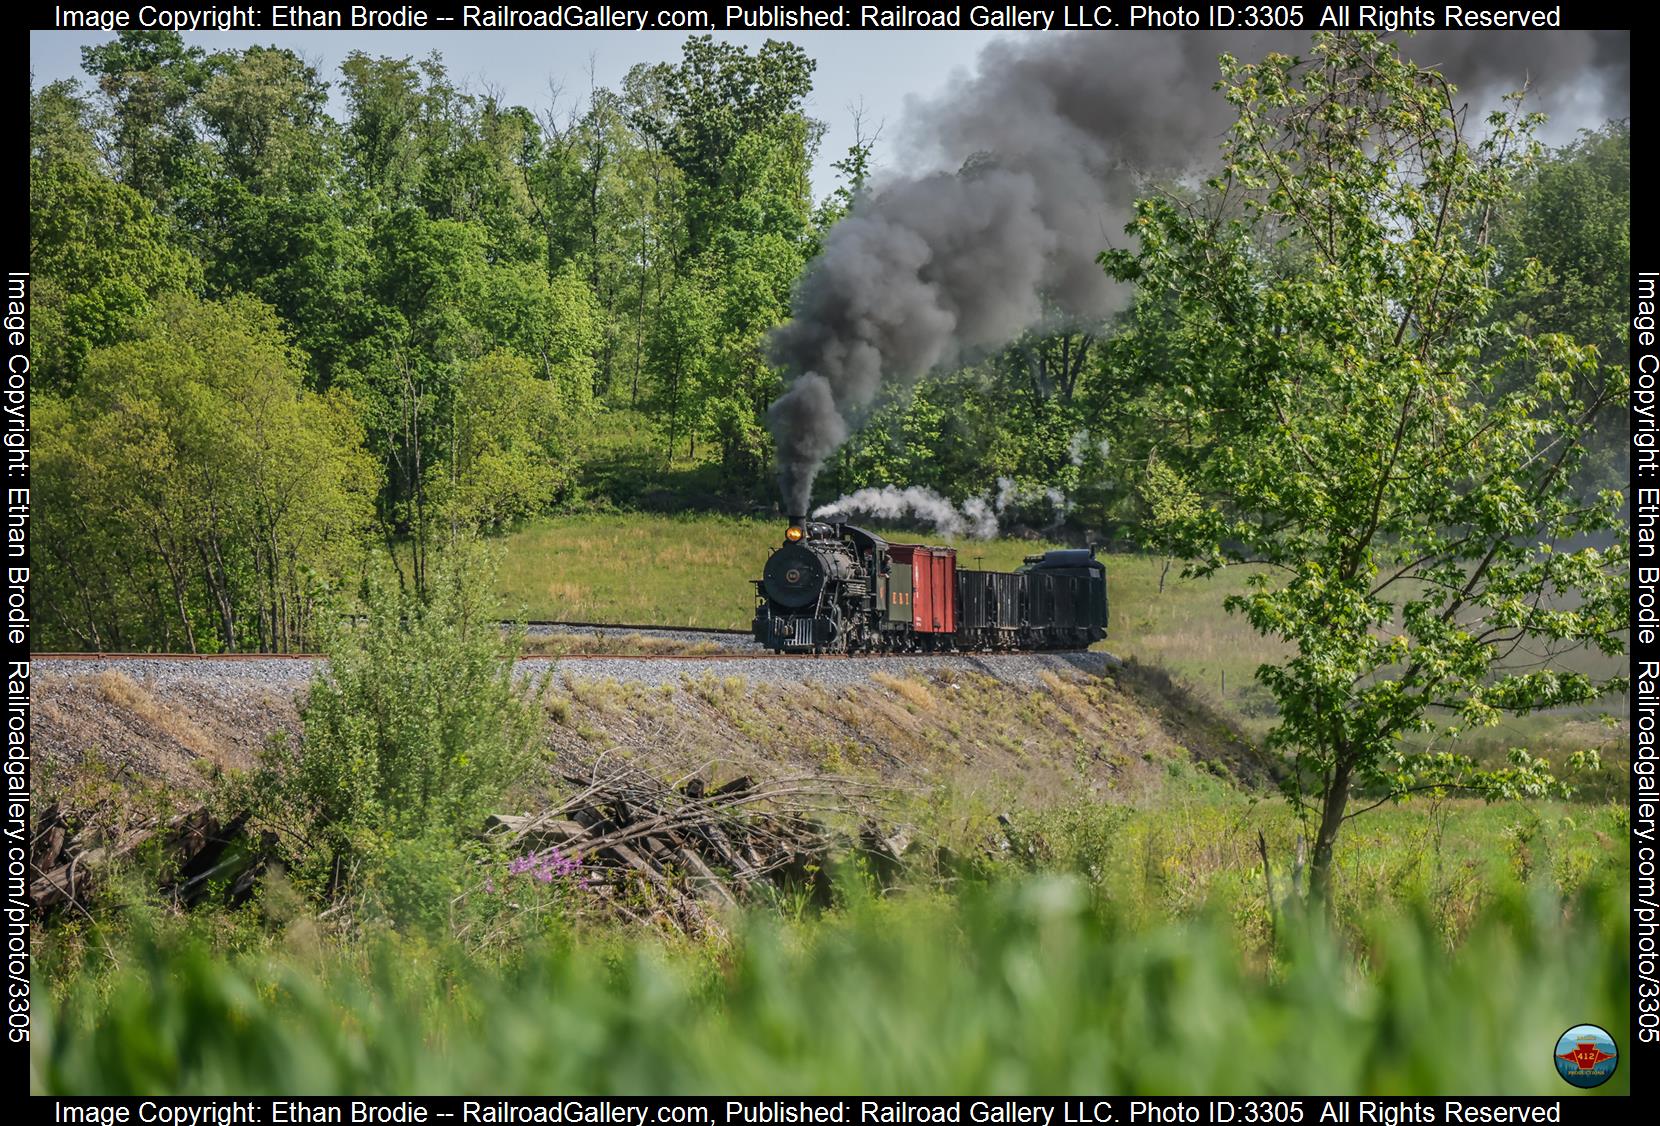 16 is a class 2-8-2 and  is pictured in Rockhill Furnace, Pennsylvania, United States.  This was taken along the N/A on the East Broad Top Railroas. Photo Copyright: Ethan Brodie uploaded to Railroad Gallery on 04/17/2024. This photograph of 16 was taken on Monday, May 15, 2023. All Rights Reserved. 